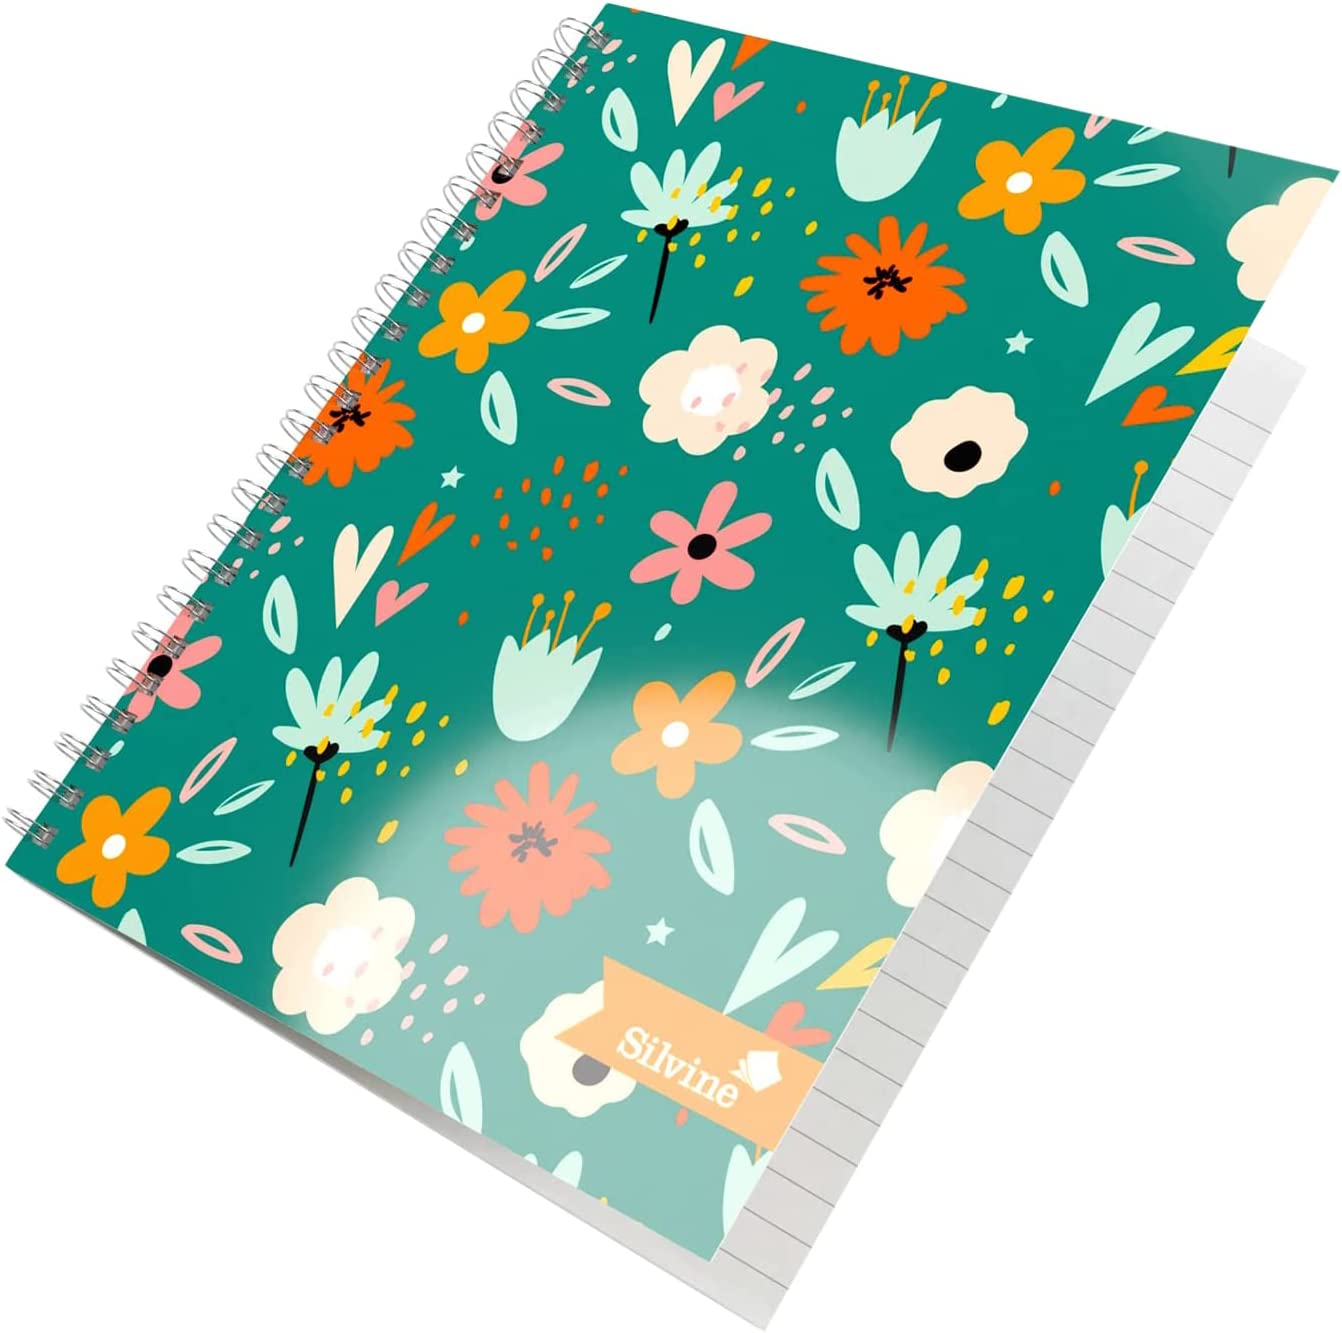 Silvine A5 Twinwire Marlene West Floral Green Notebook 160 Pages RRP £3.86 CLEARANCE XL £1.50